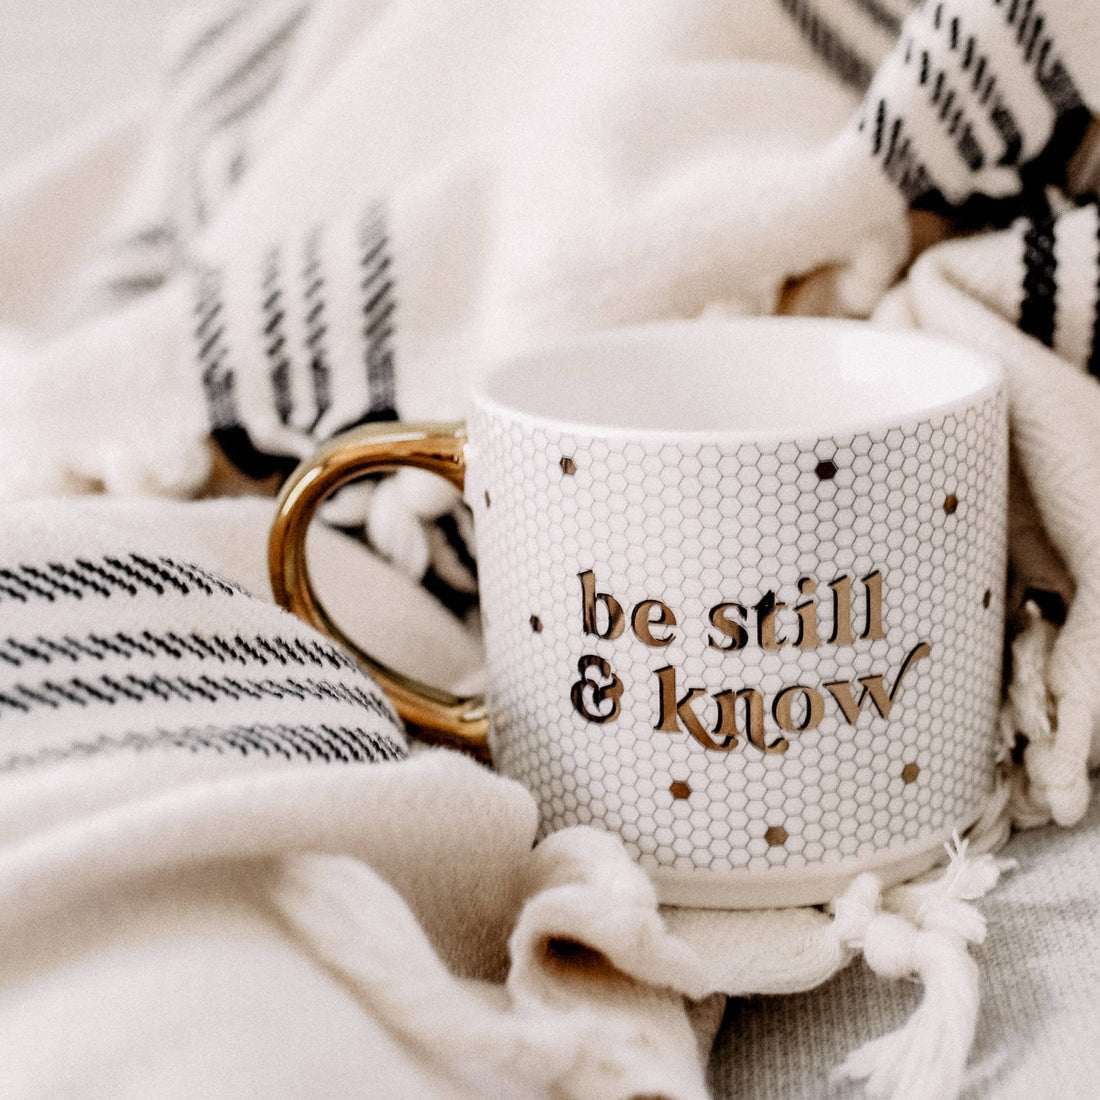 Be Still and Know Gold Tile Coffee Mug - Gifts &amp; Home Decor